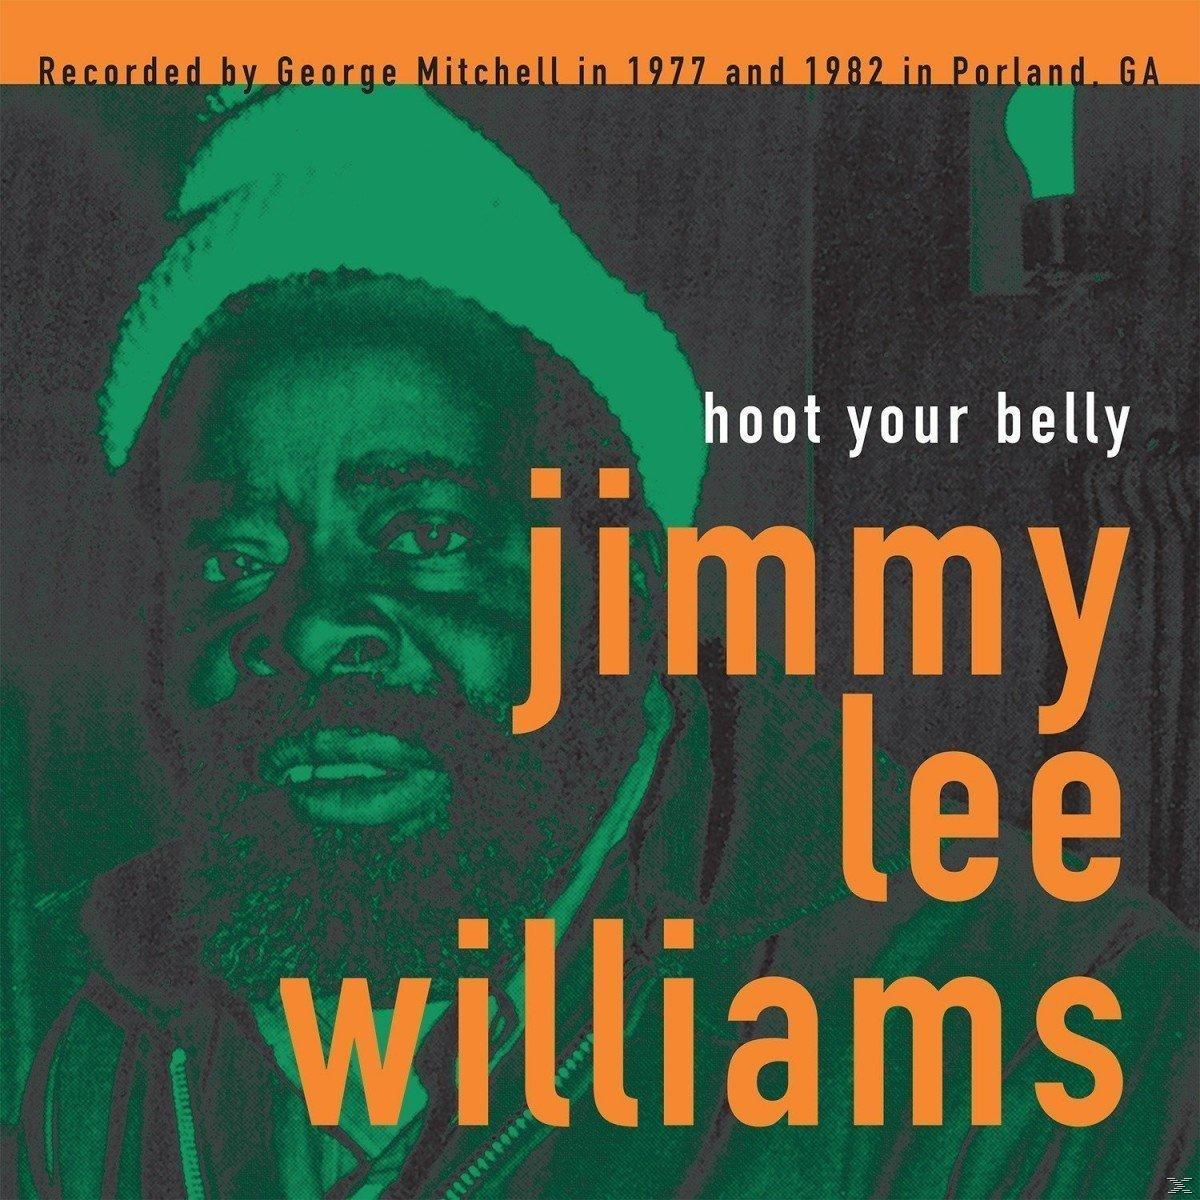 Williams - (Vinyl) - Lee Belly Jimmy Hoot Your